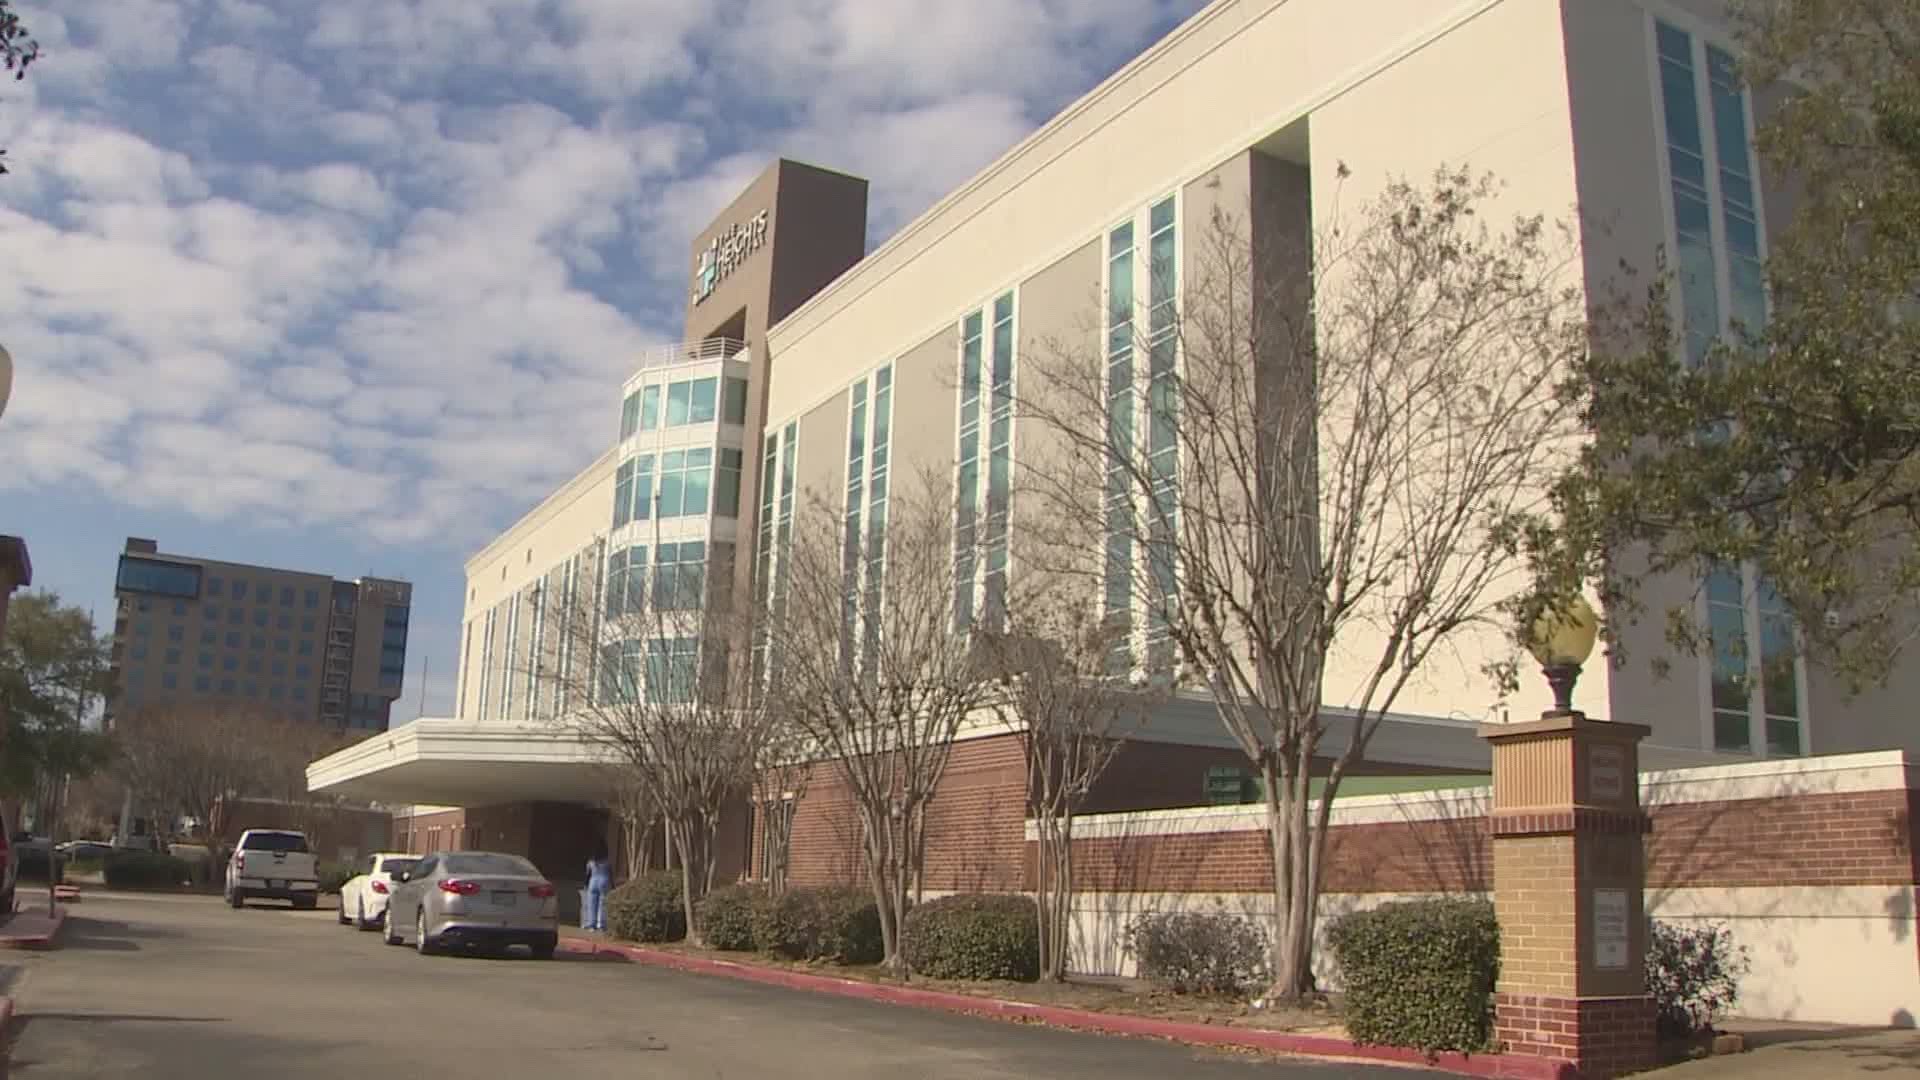 A lawsuit filed in Harris County on Jan. 8 led to the locks being changed at The Heights Hospital. Now, doctors and patients are left with questions.